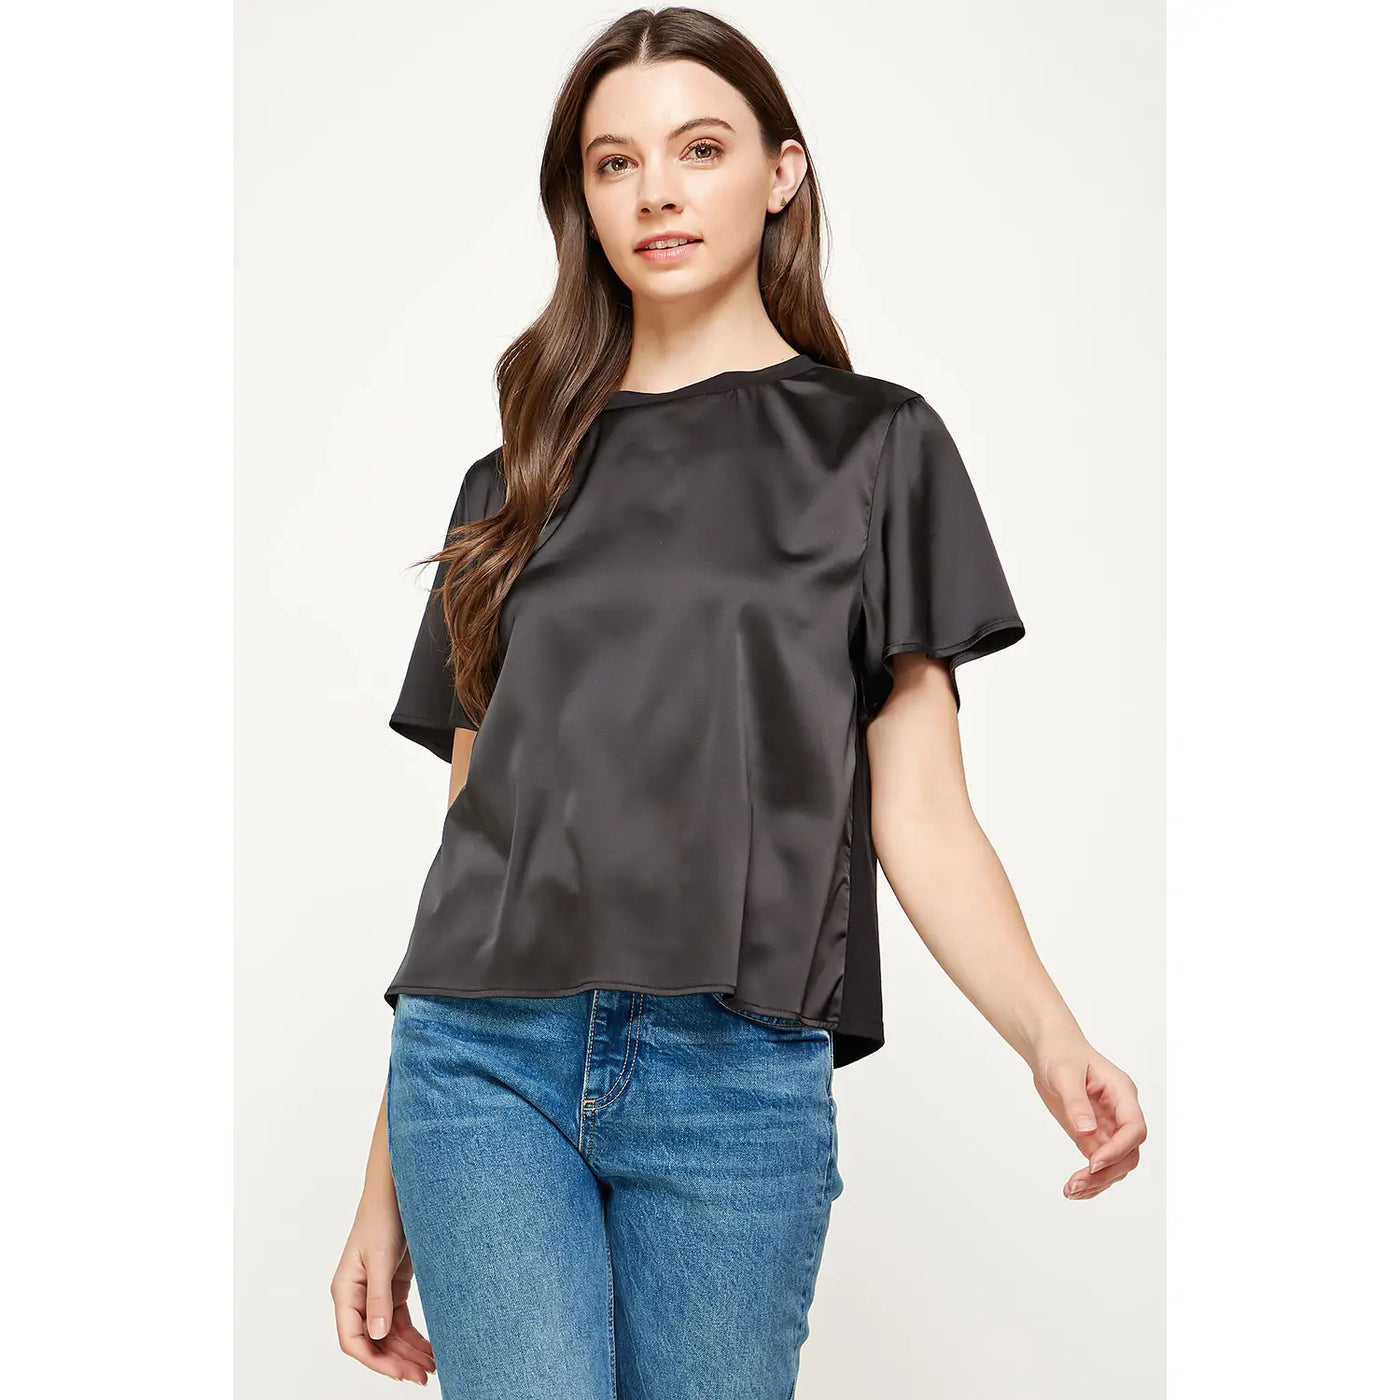 Satin Tee with Contrast Knit Back